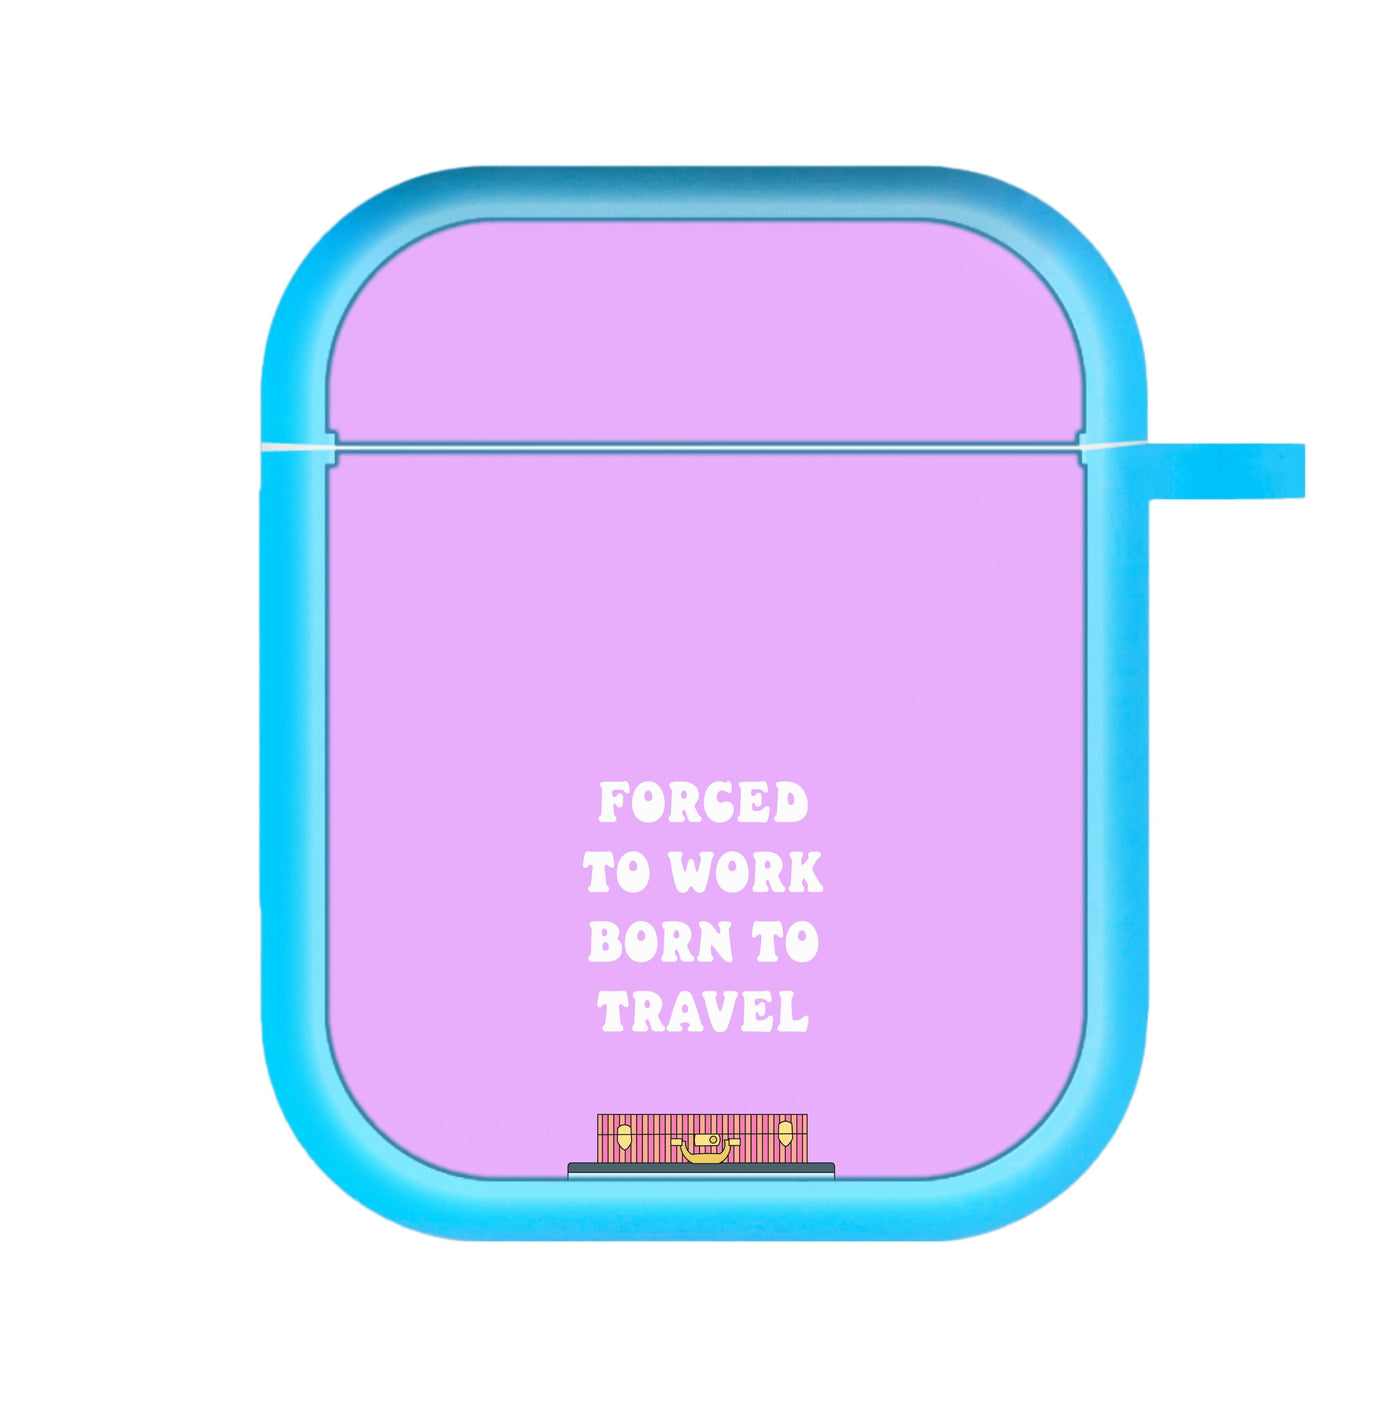 Forced To Work Born To Travel - Travel AirPods Case